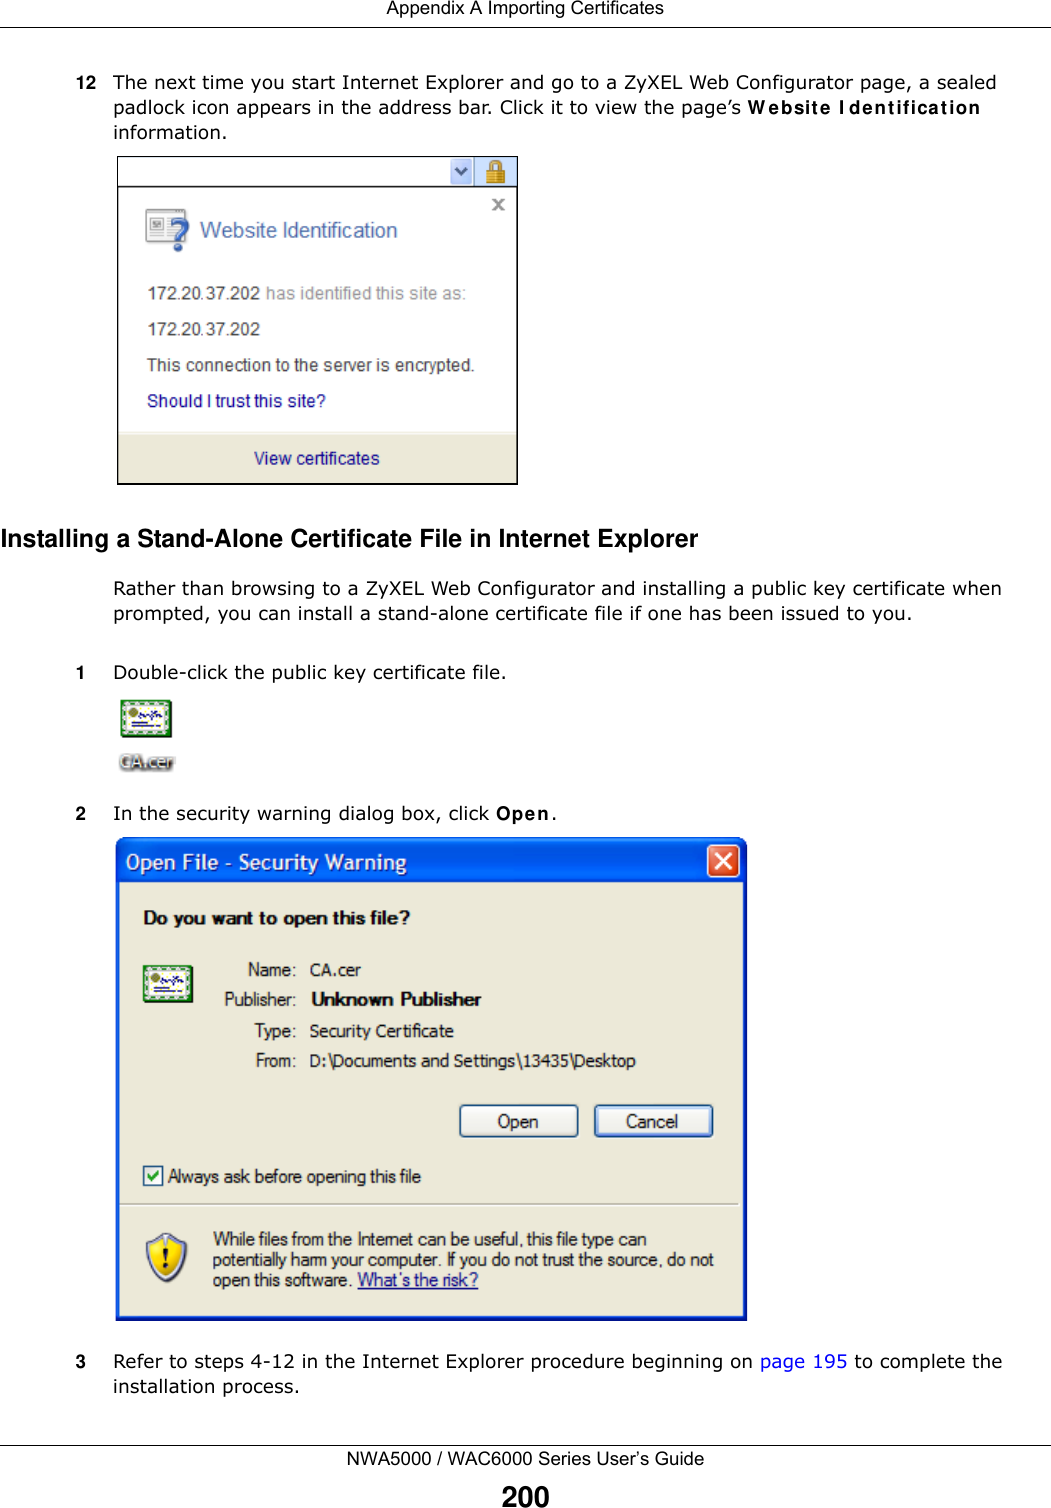 Appendix A Importing CertificatesNWA5000 / WAC6000 Series User’s Guide20012 The next time you start Internet Explorer and go to a ZyXEL Web Configurator page, a sealed padlock icon appears in the address bar. Click it to view the page’s Website Identification information.Installing a Stand-Alone Certificate File in Internet ExplorerRather than browsing to a ZyXEL Web Configurator and installing a public key certificate when prompted, you can install a stand-alone certificate file if one has been issued to you.1Double-click the public key certificate file.2In the security warning dialog box, click Open.3Refer to steps 4-12 in the Internet Explorer procedure beginning on page 195 to complete the installation process.